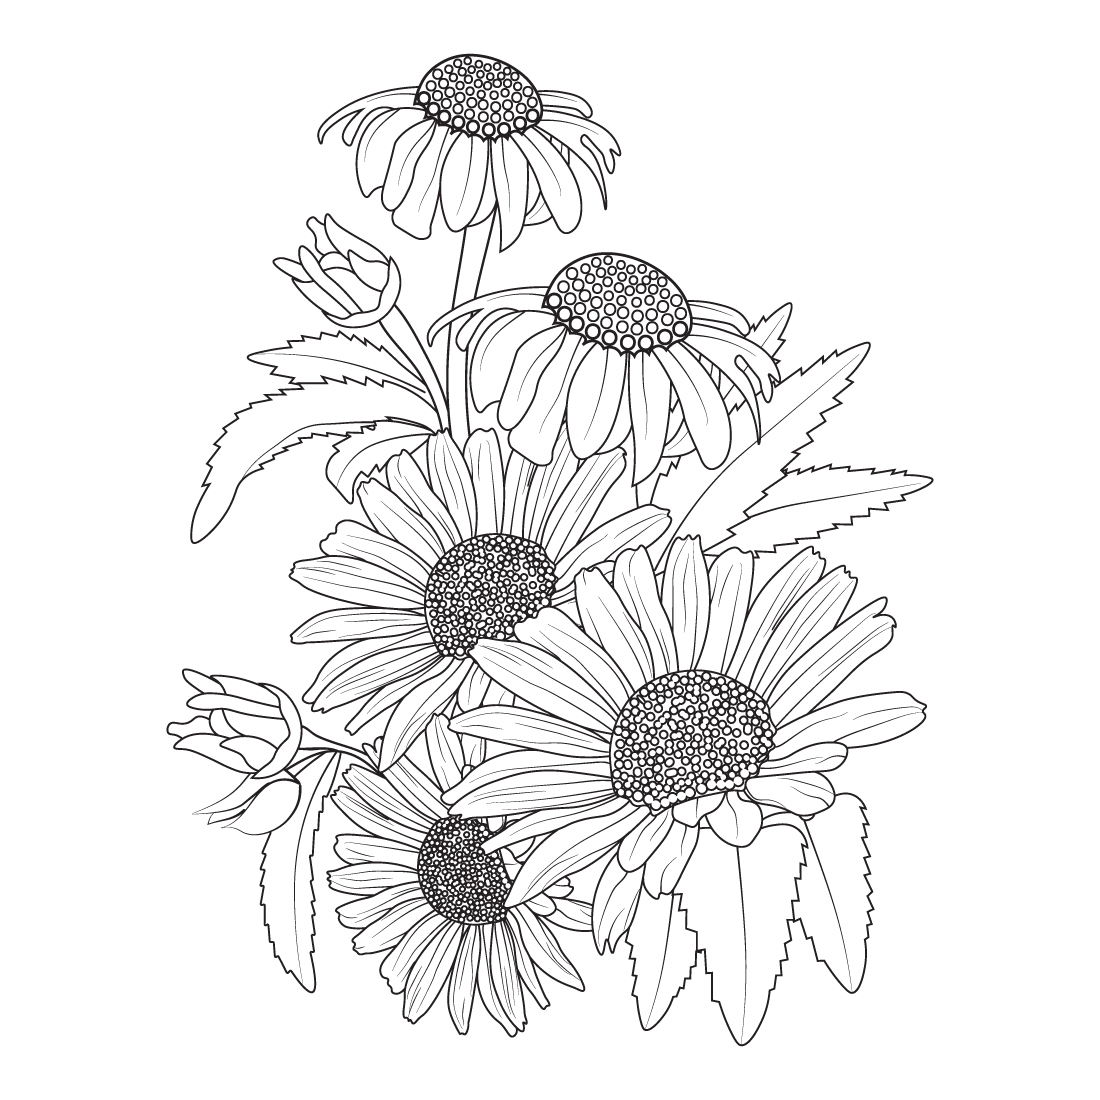 Outline Daisy Flower Drawing, Drawing Daisy Flower Black and White.  Realistic Daisy Flower Drawing, Daisy Flower Drawing. Stock Vector -  Illustration of adobe, demand: 276524996